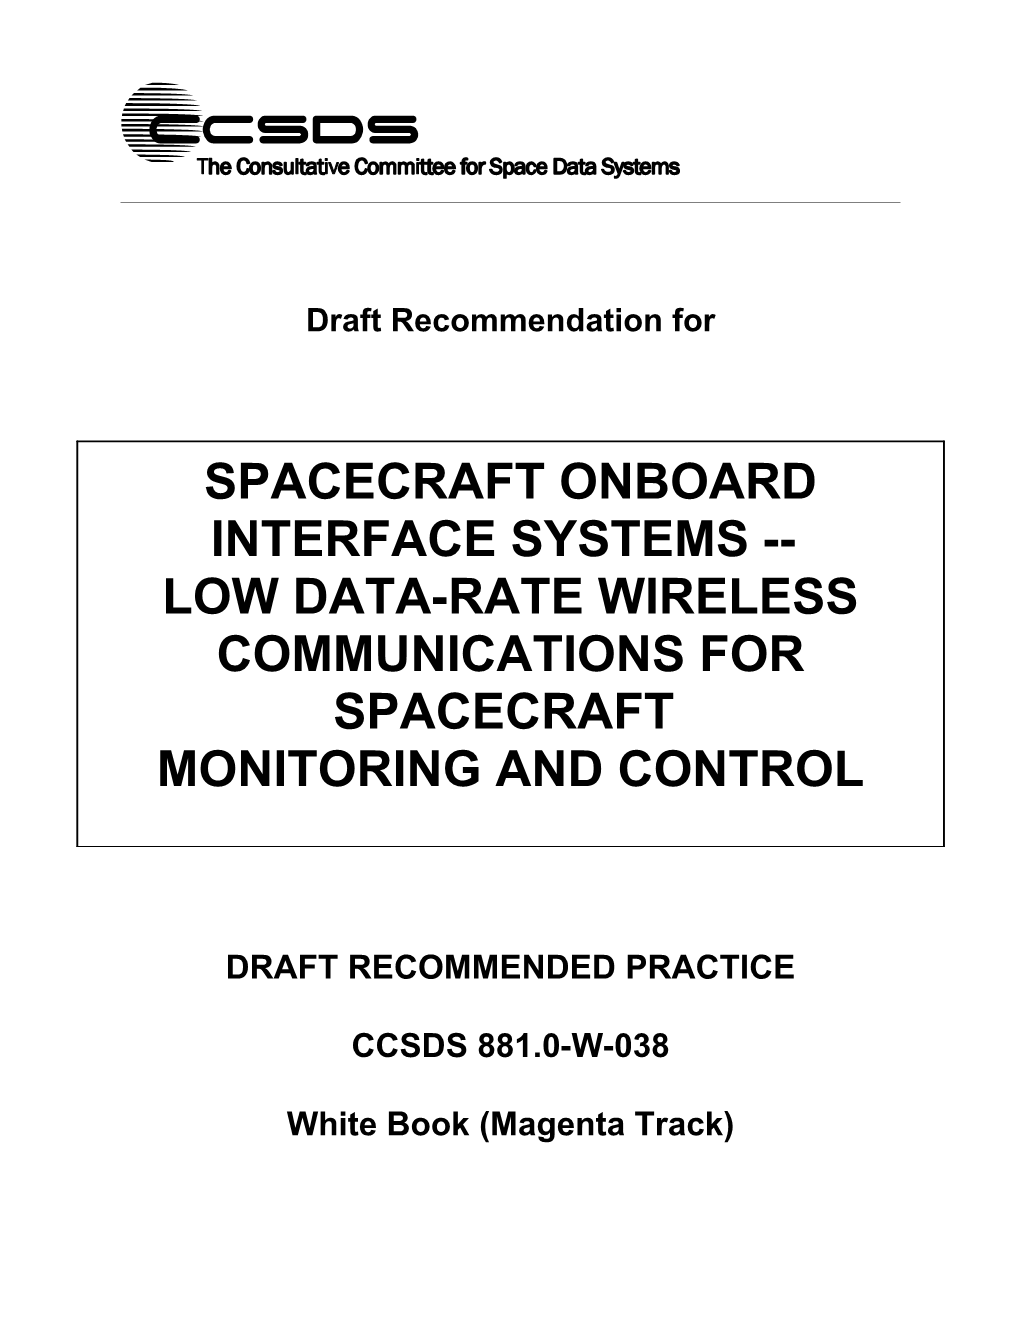 Spacecraft Onboard Interface Systems Wireless Inventory Management Systems